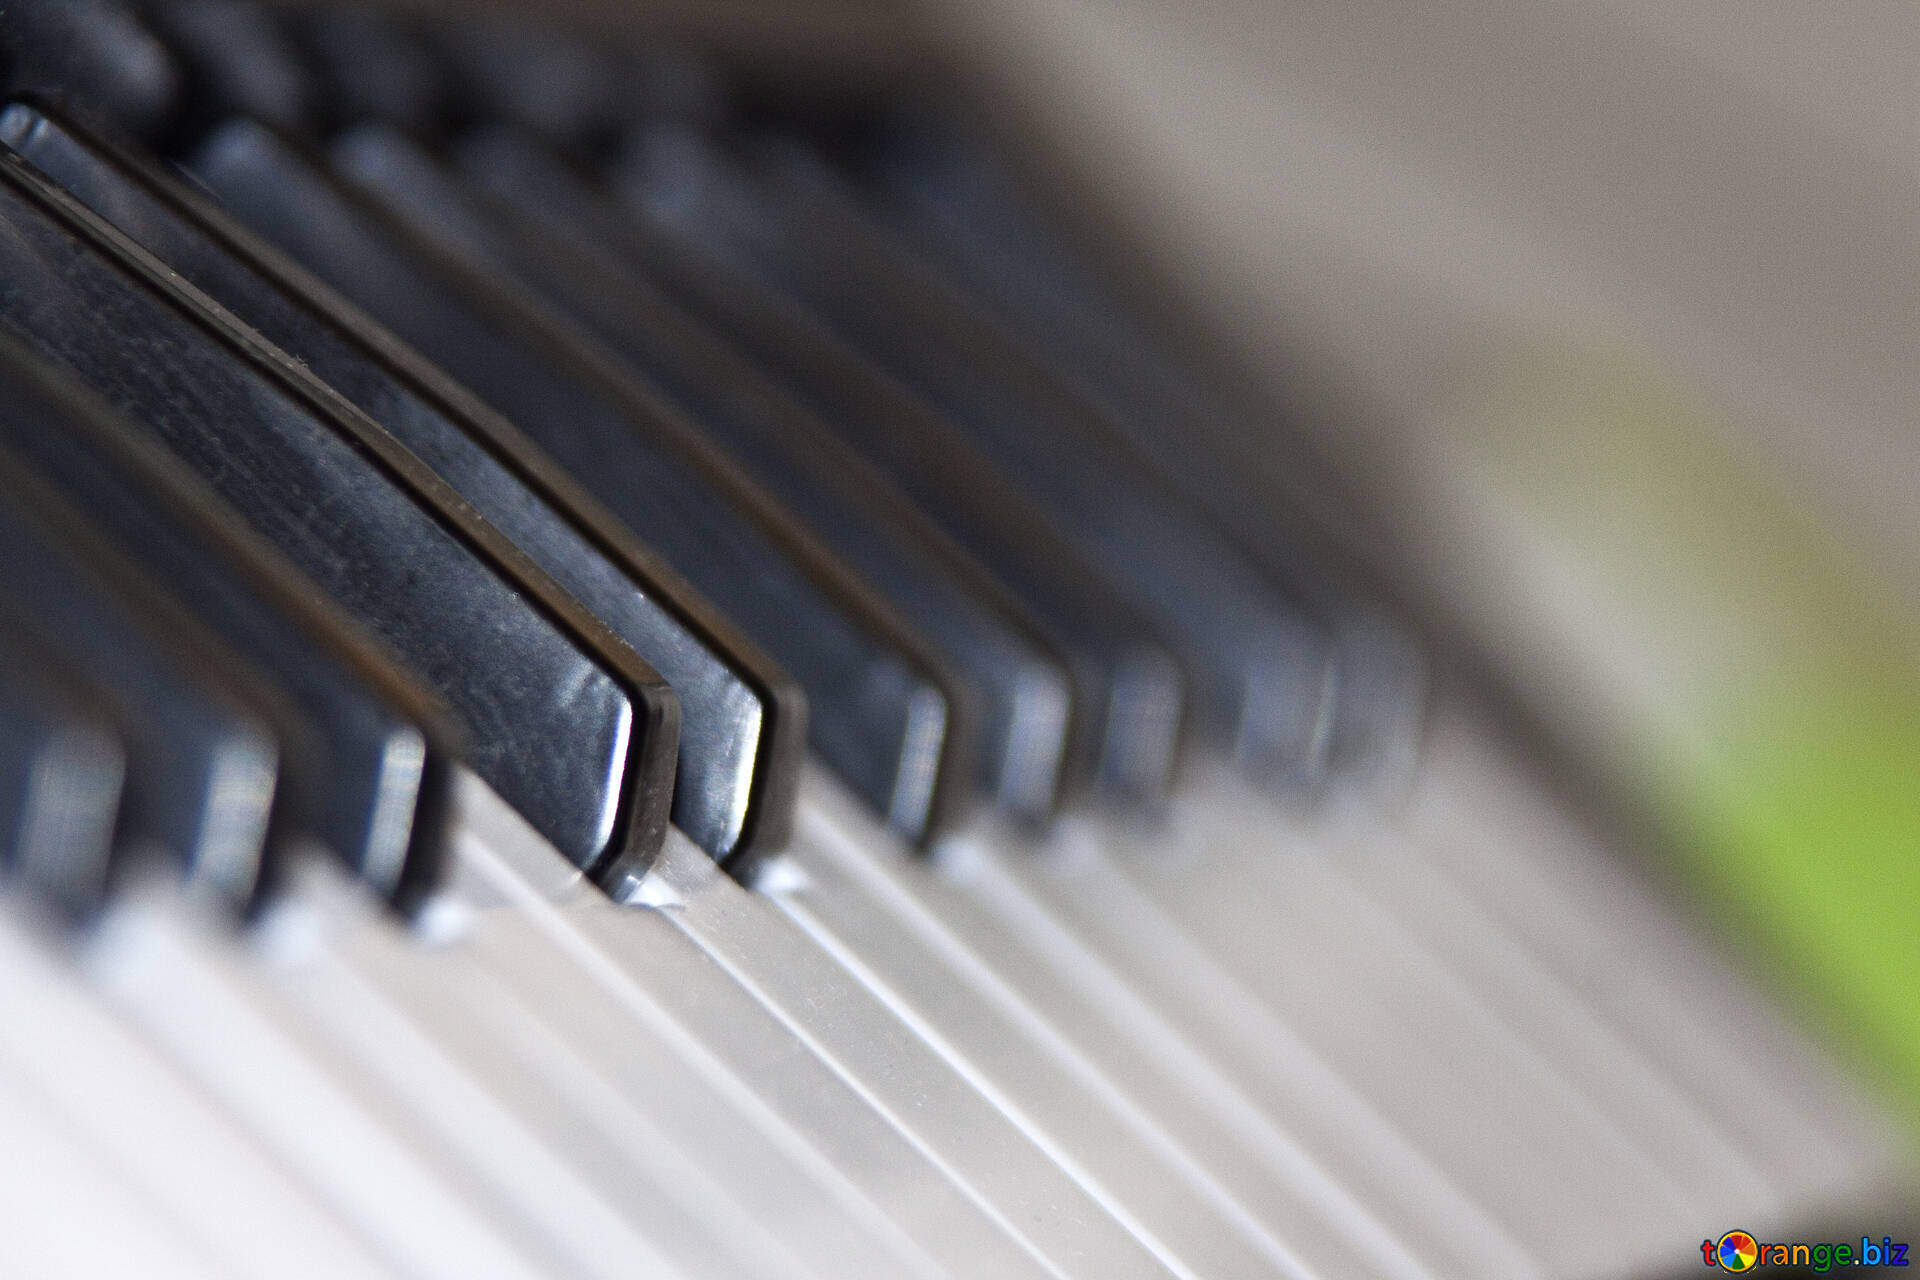 Grand piano keys image piano keyboard images music № 4488  ~  free pics on cc-by license